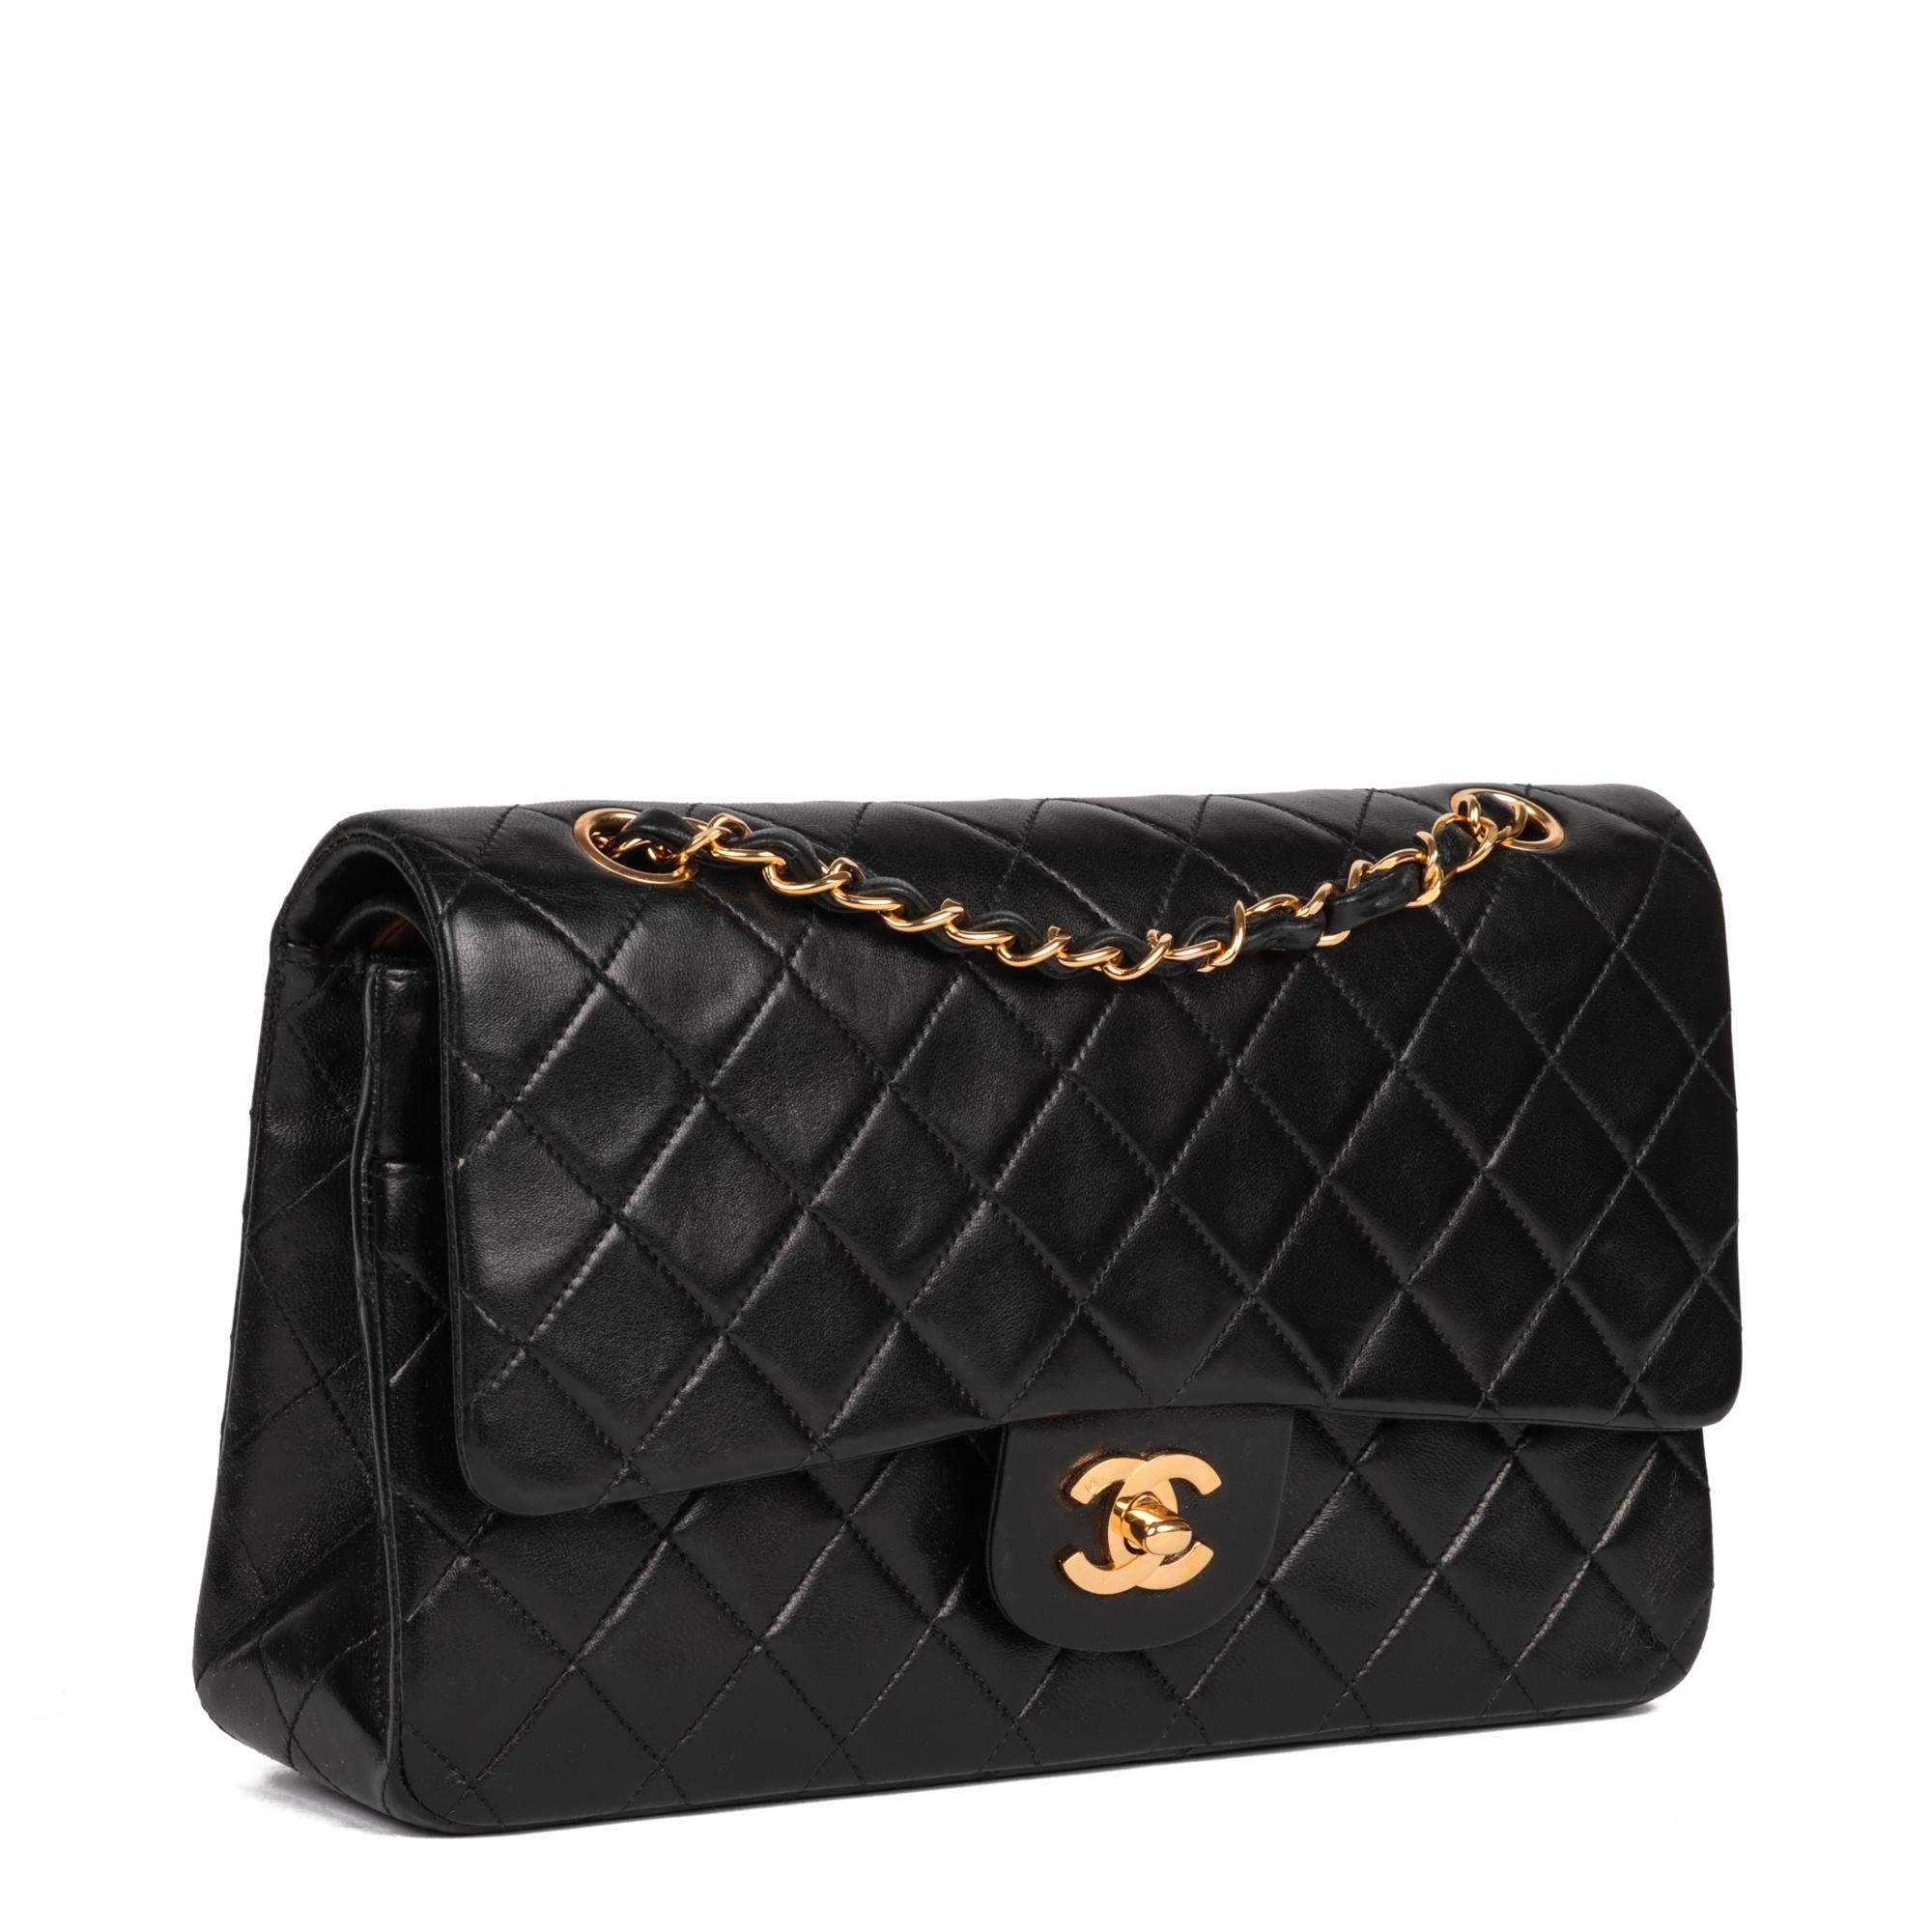 CHANEL
Black Quilted Lambskin Vintage Medium Classic Double Flap Bag

Xupes Reference: HB5192
Serial Number: 2342522
Age (Circa): 1992
Accompanied By: Chanel Dust Bag, Authenticity Card
Authenticity Details: Authenticity Card, Serial Sticker (Made